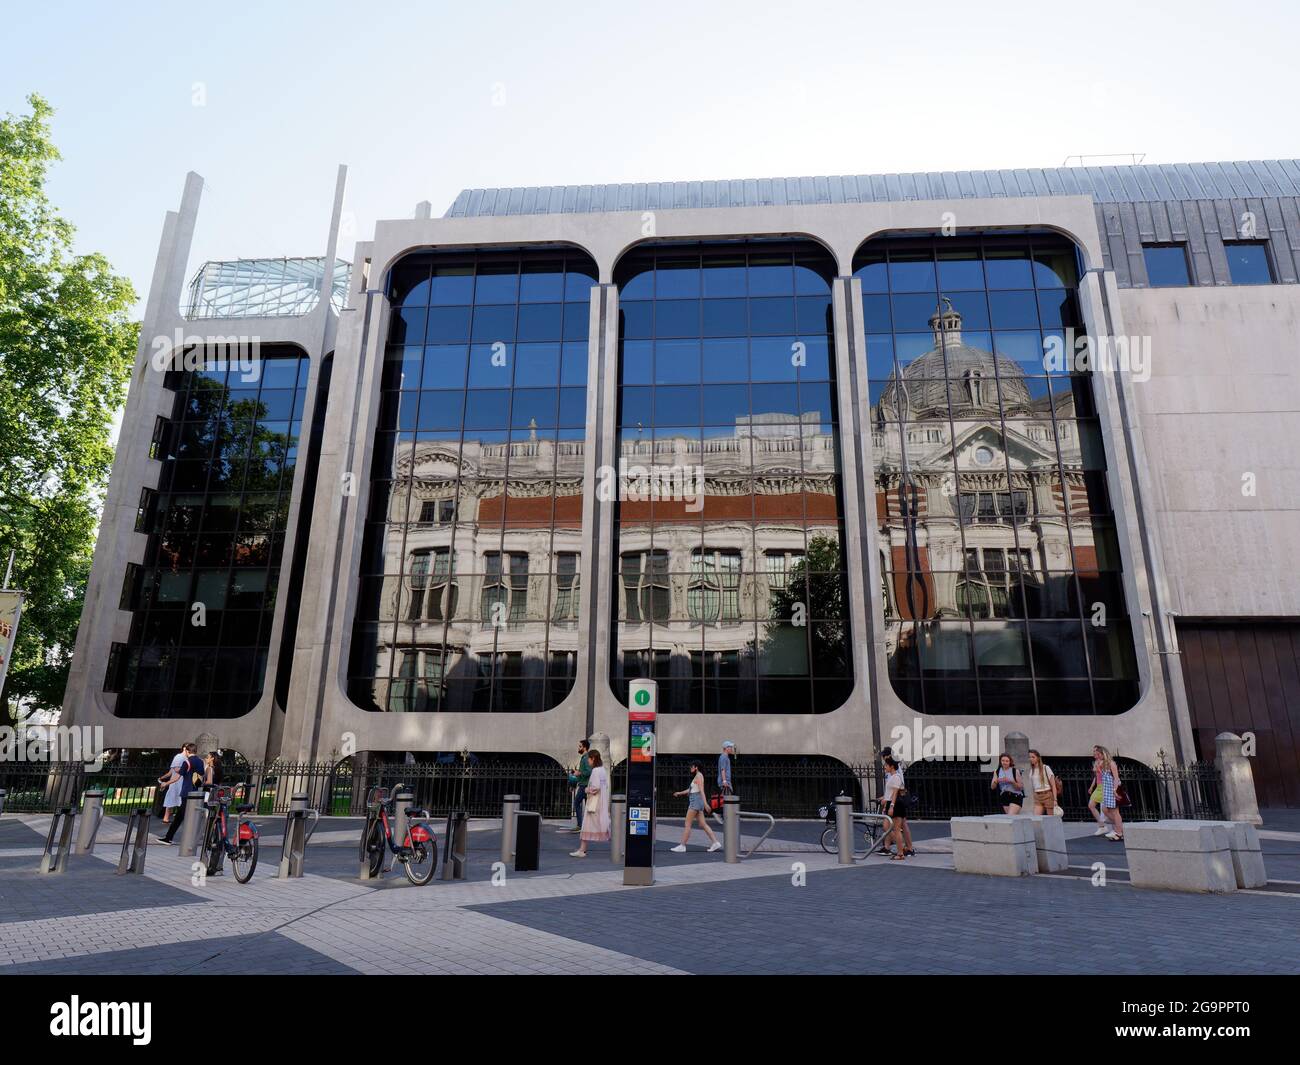 London, Greater London, England, July 17 2021: Victoria and Albert museum reflected in a building on Exhibition Road. Stock Photo